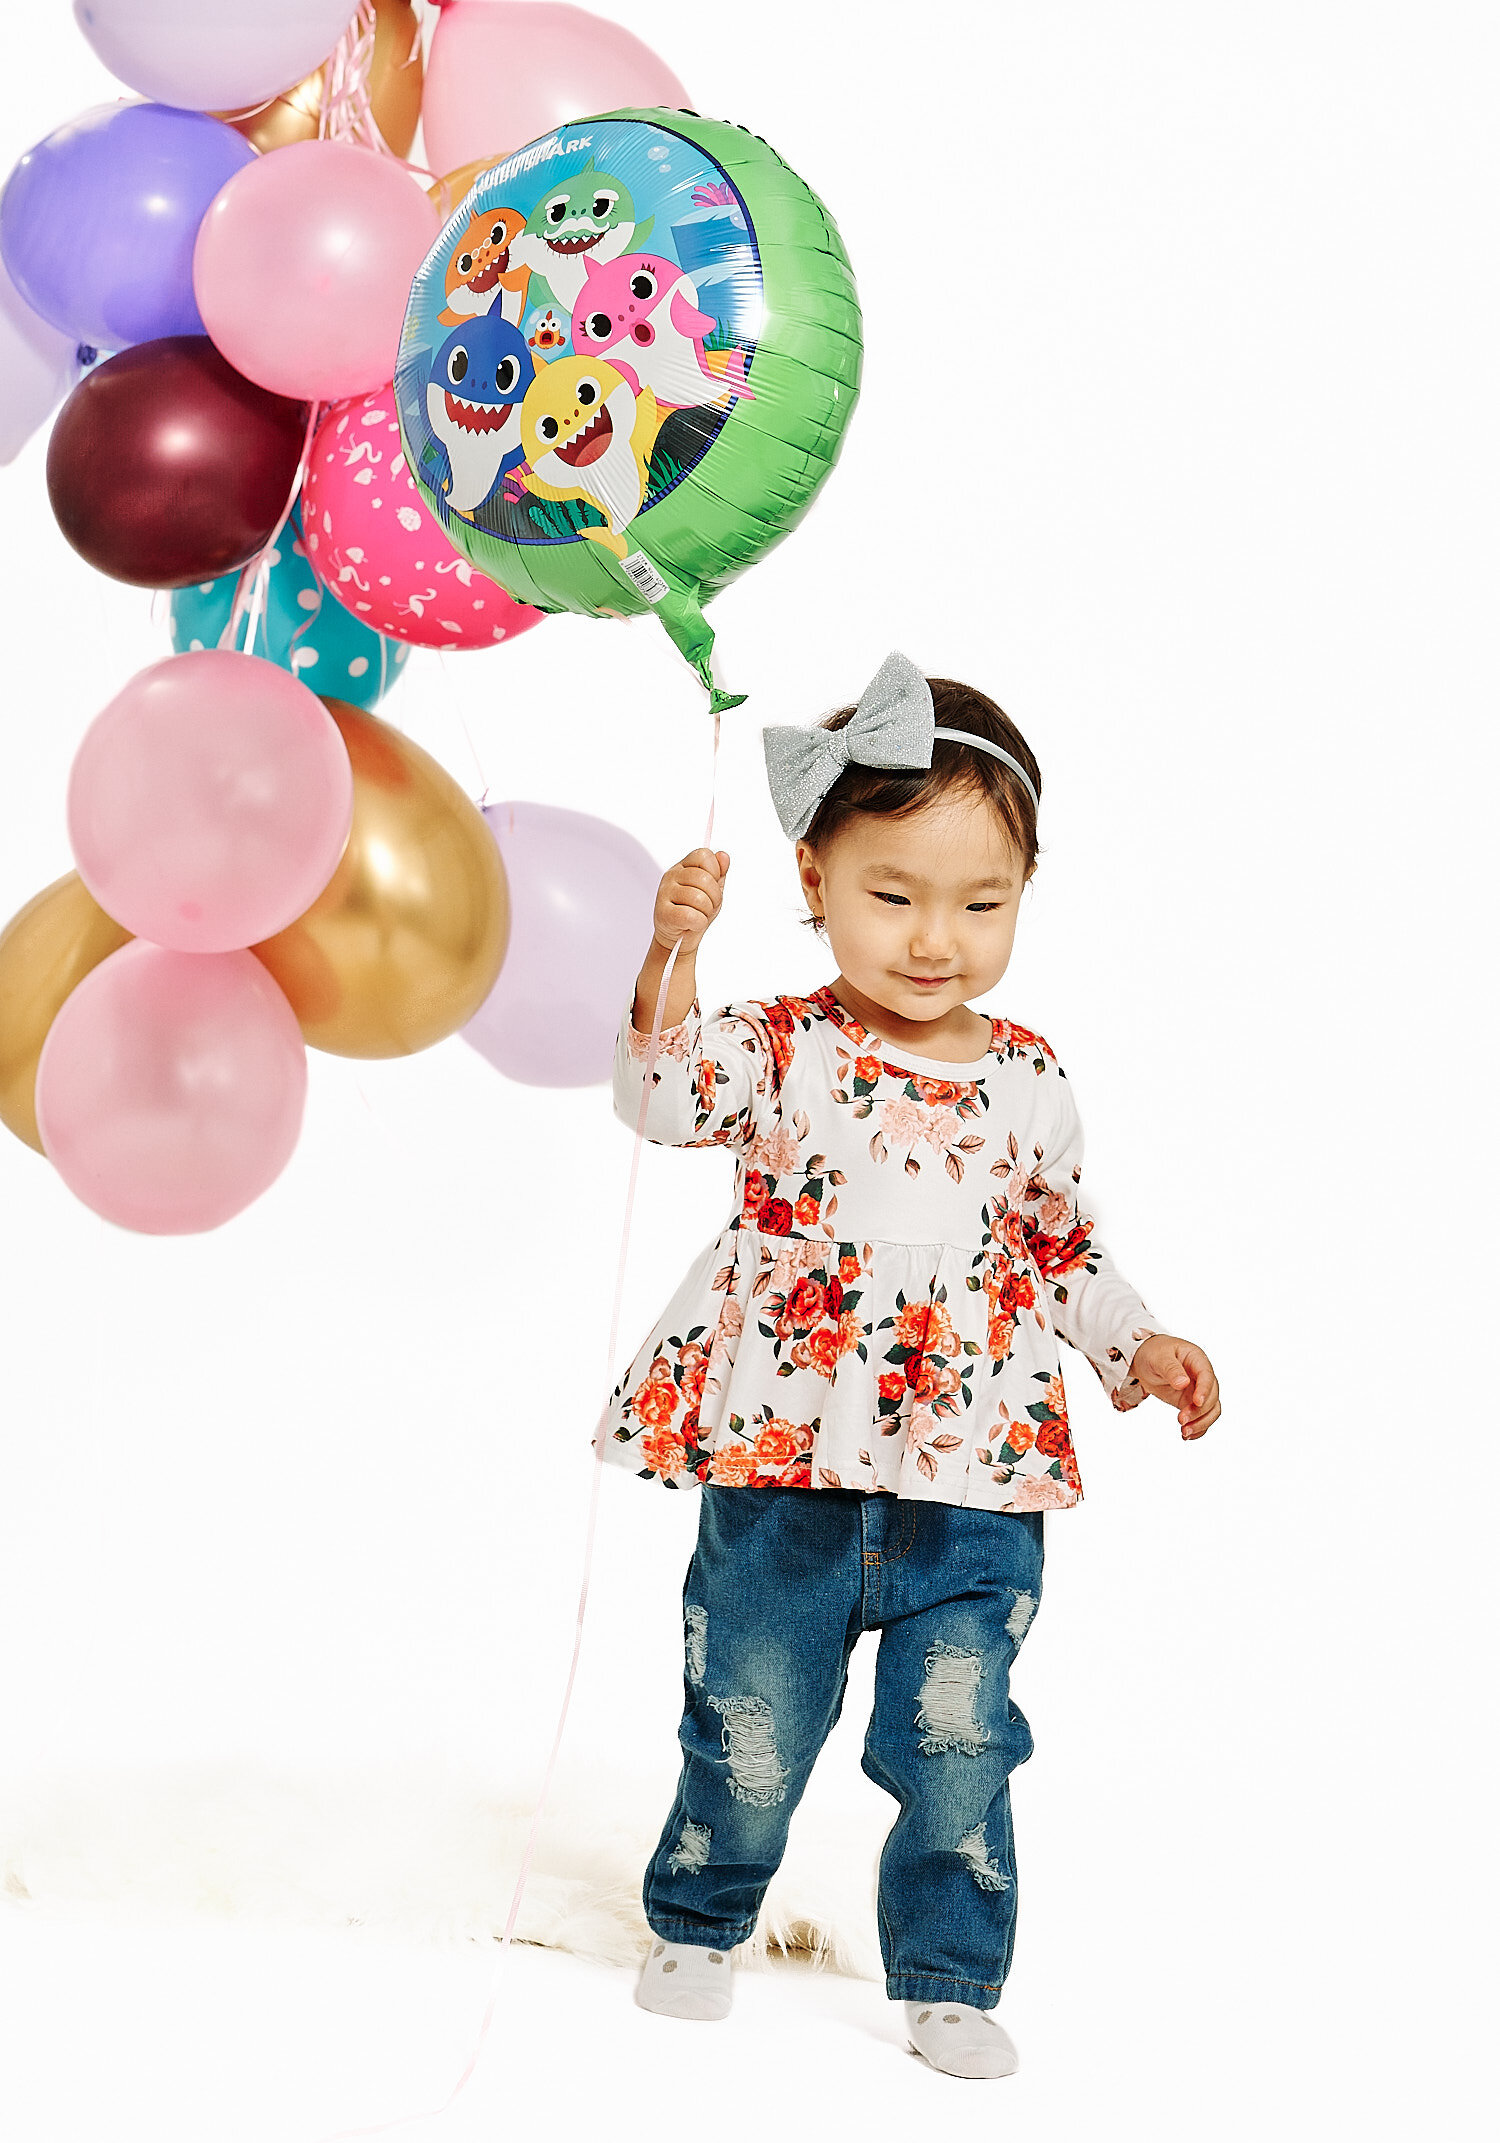  Gulmira Azamatova is posing for her 2nd birthday photos with her mother Nuriza Dobutova and her father Azamat Anapiiaev and her favorite toys. They are in a pro photo studio with white background. 